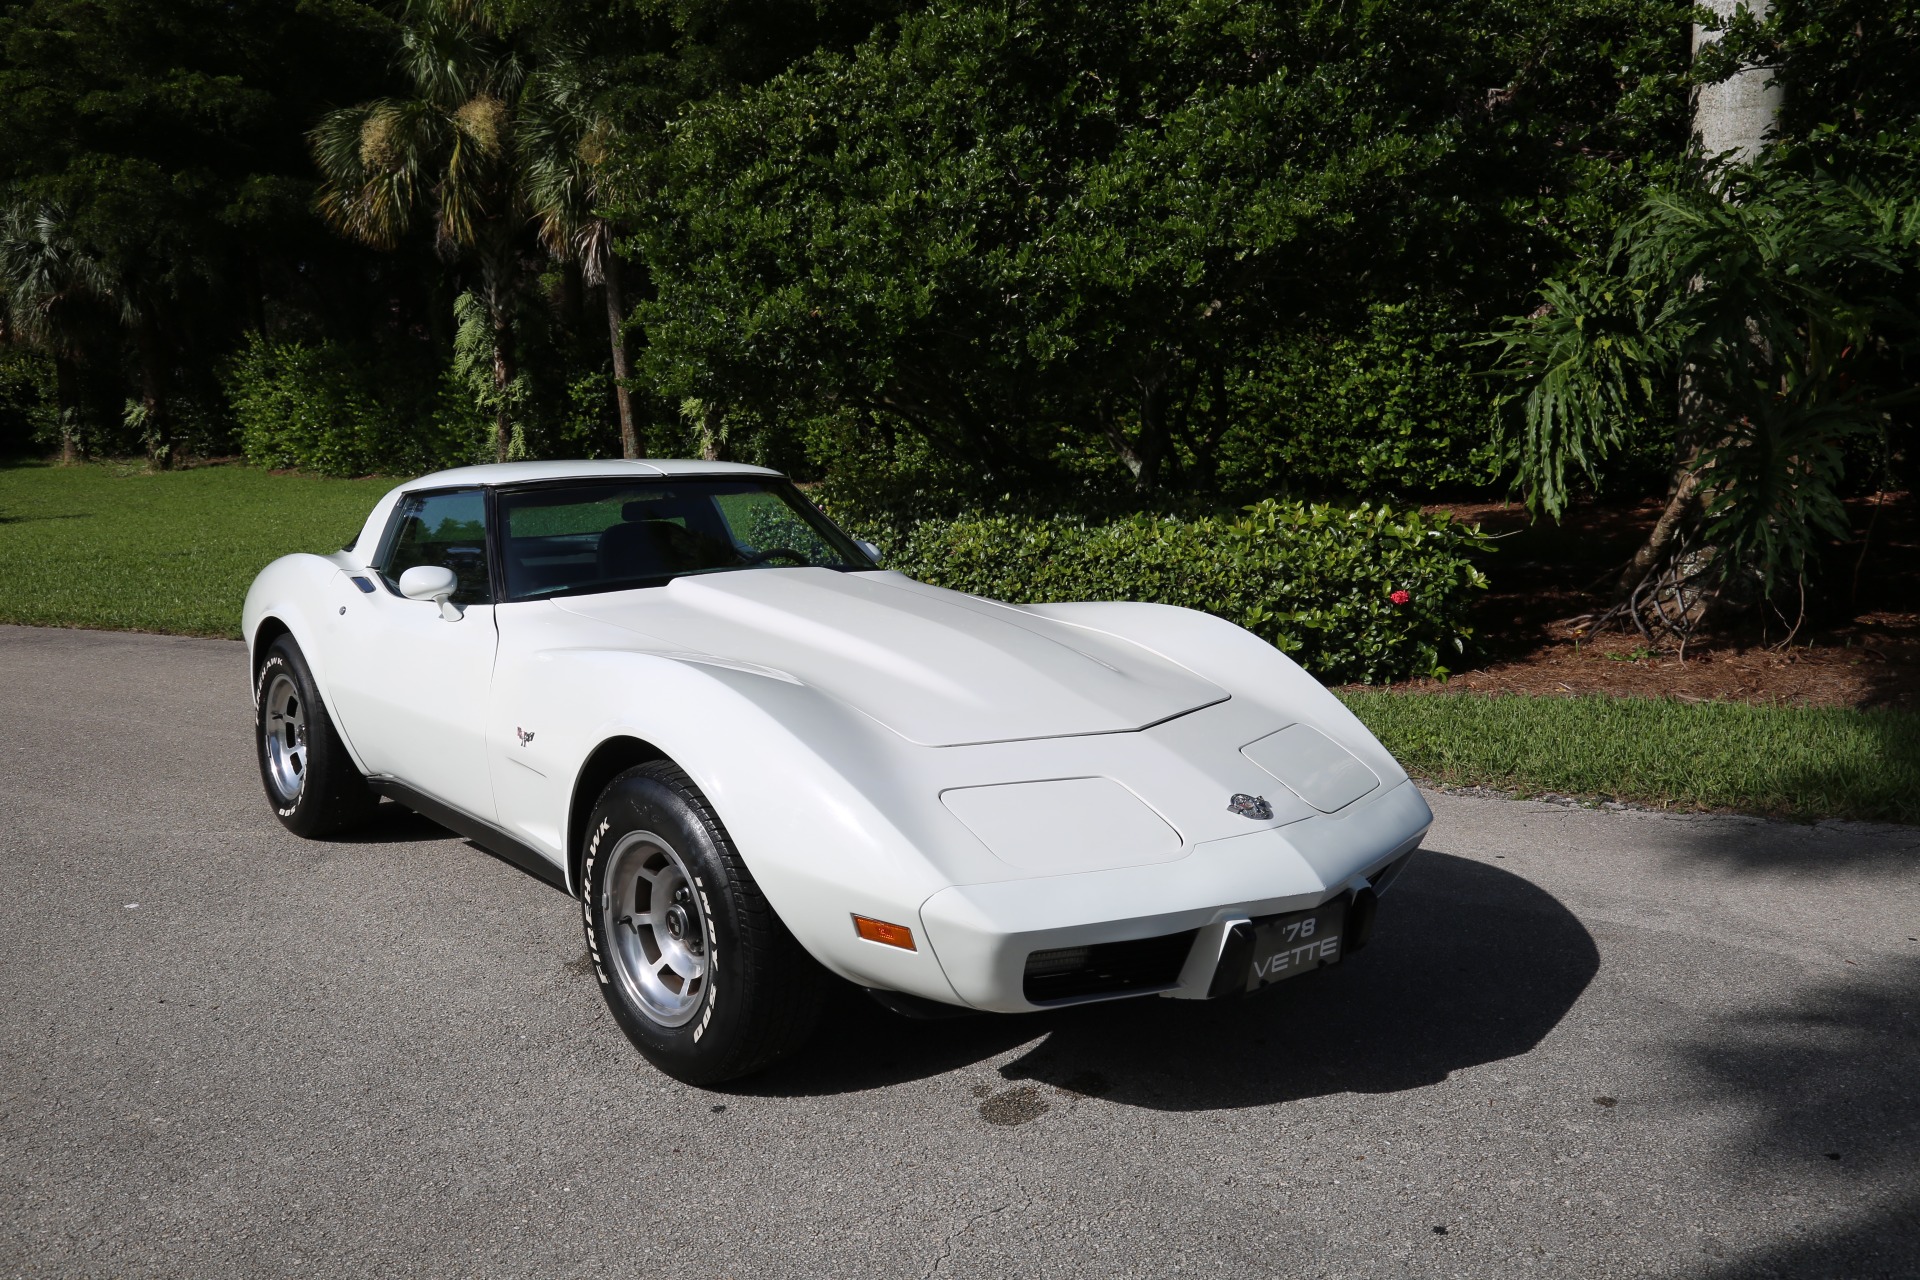 Used 1978 Chevrolet Corvette Anniversary Edition for sale Sold at Muscle Cars for Sale Inc. in Fort Myers FL 33912 7